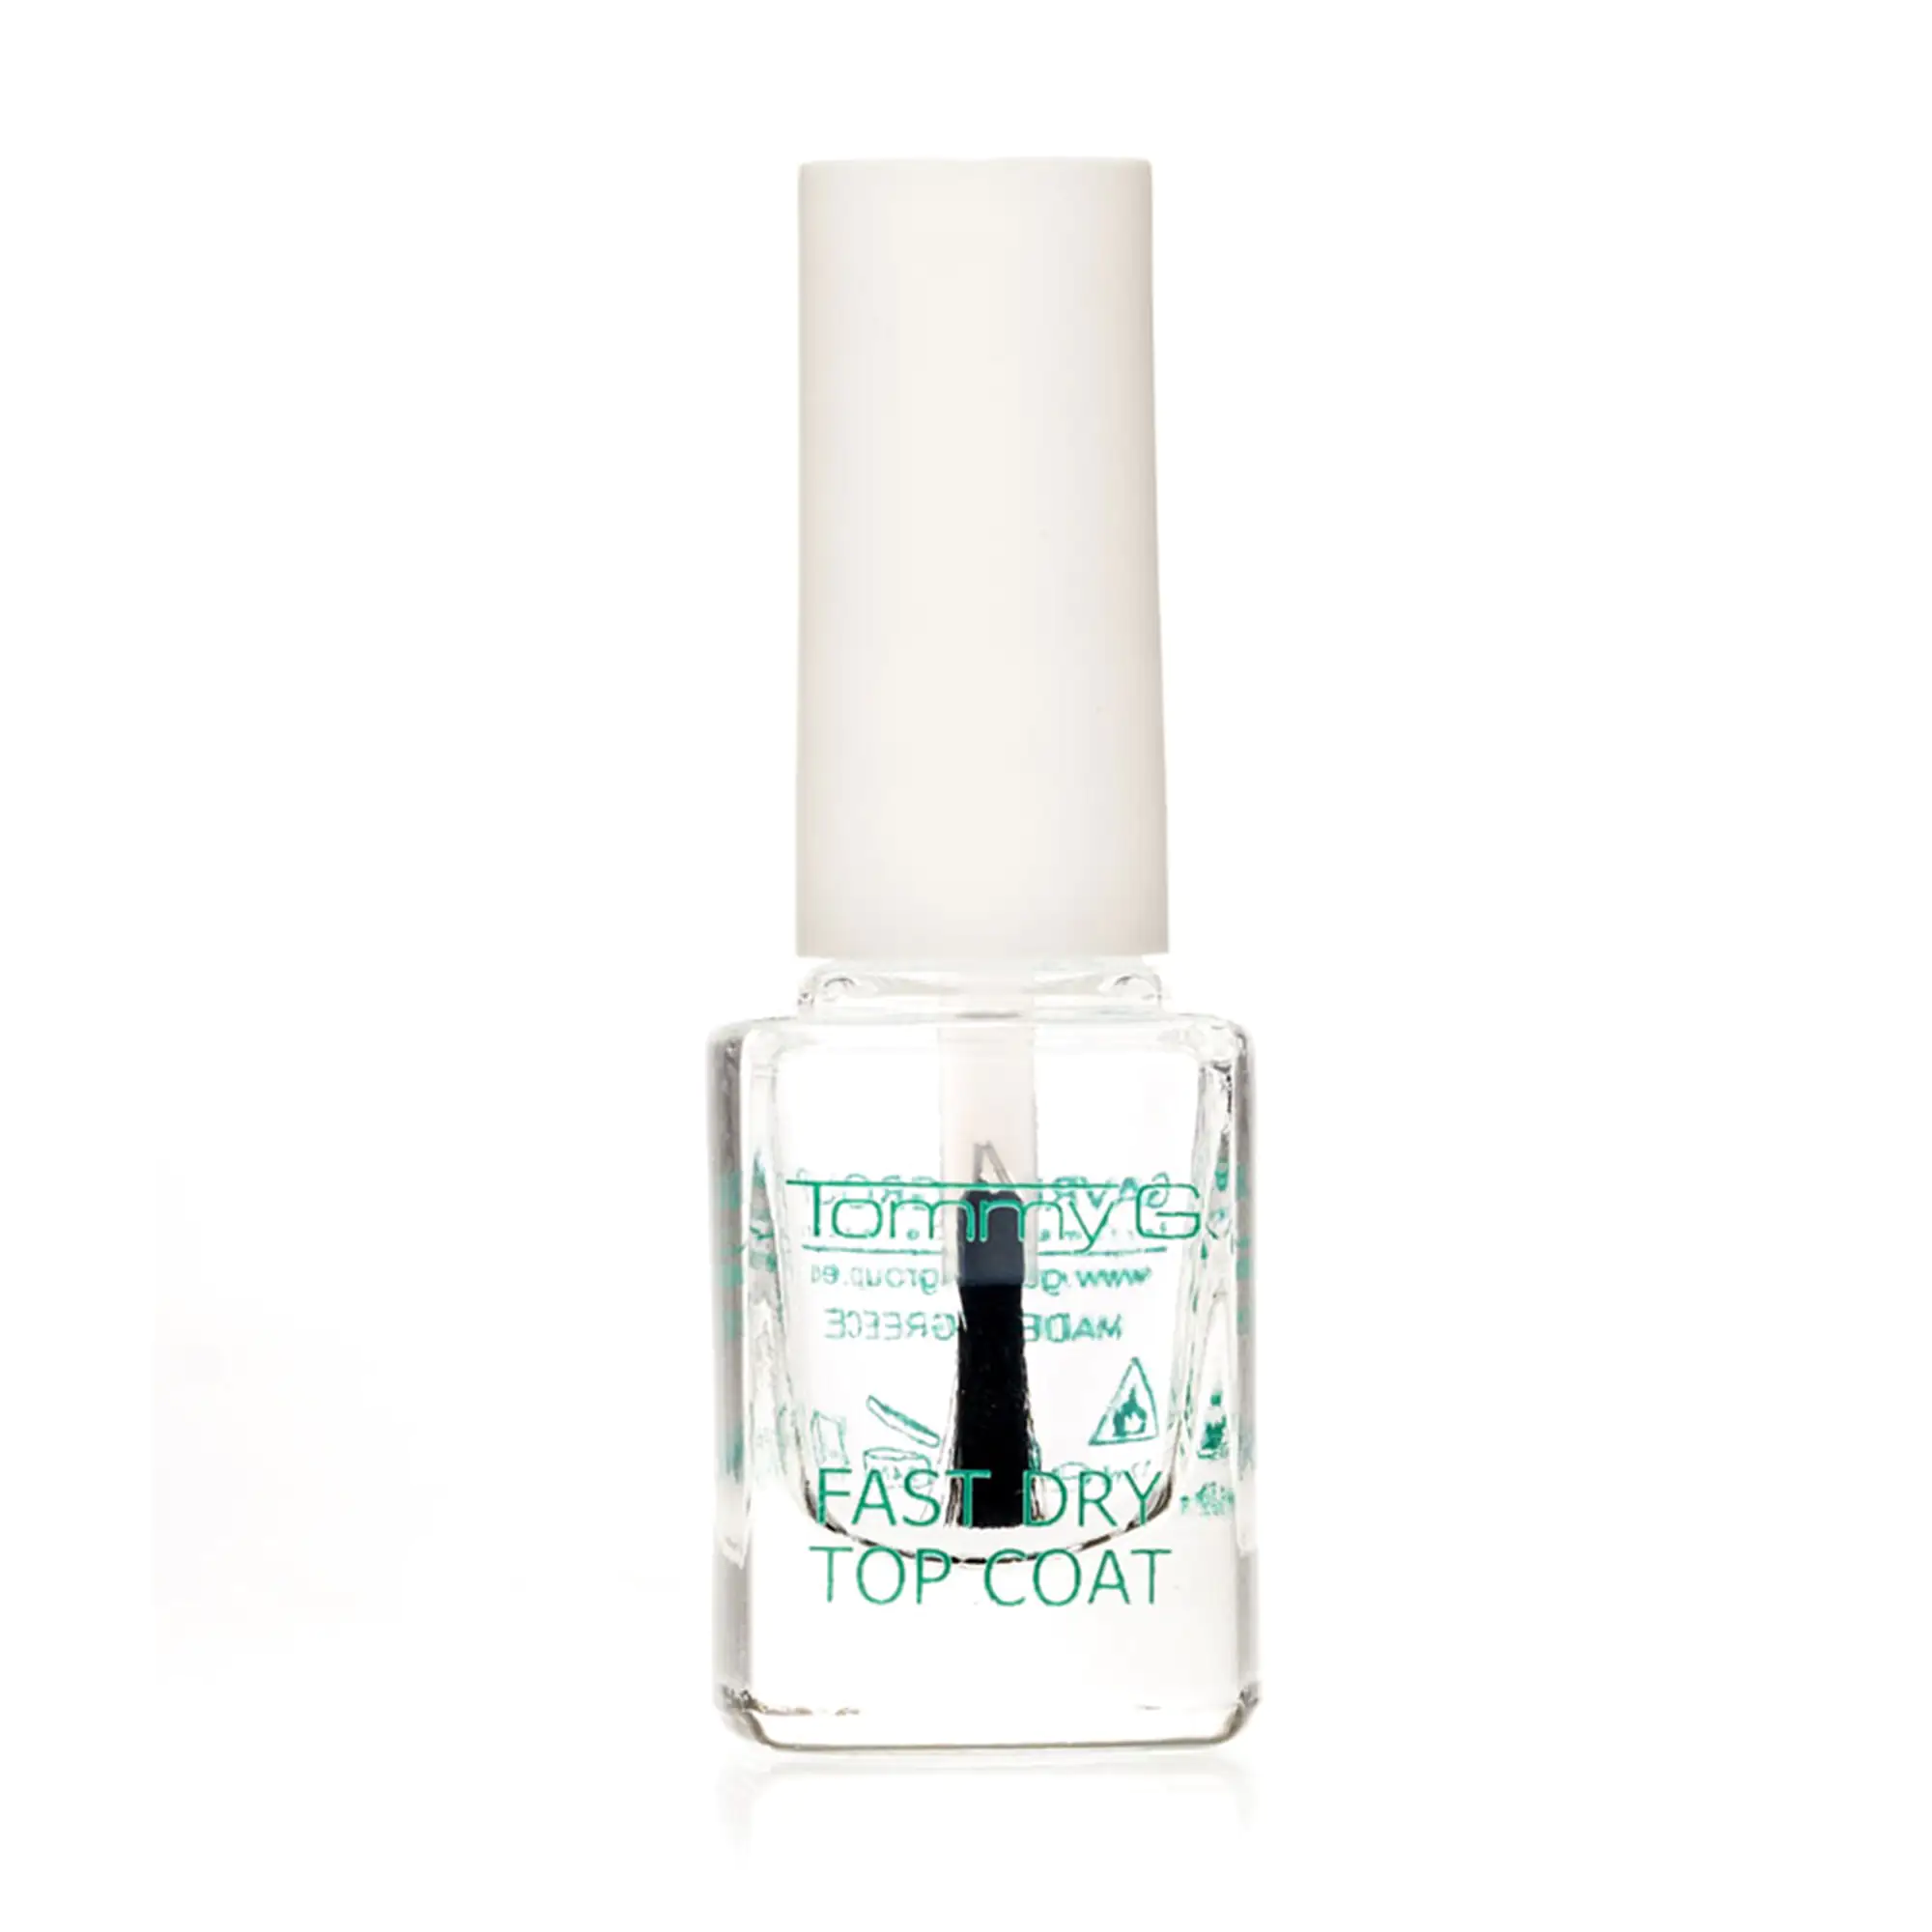 Tommy G Top Coat Fast Dry